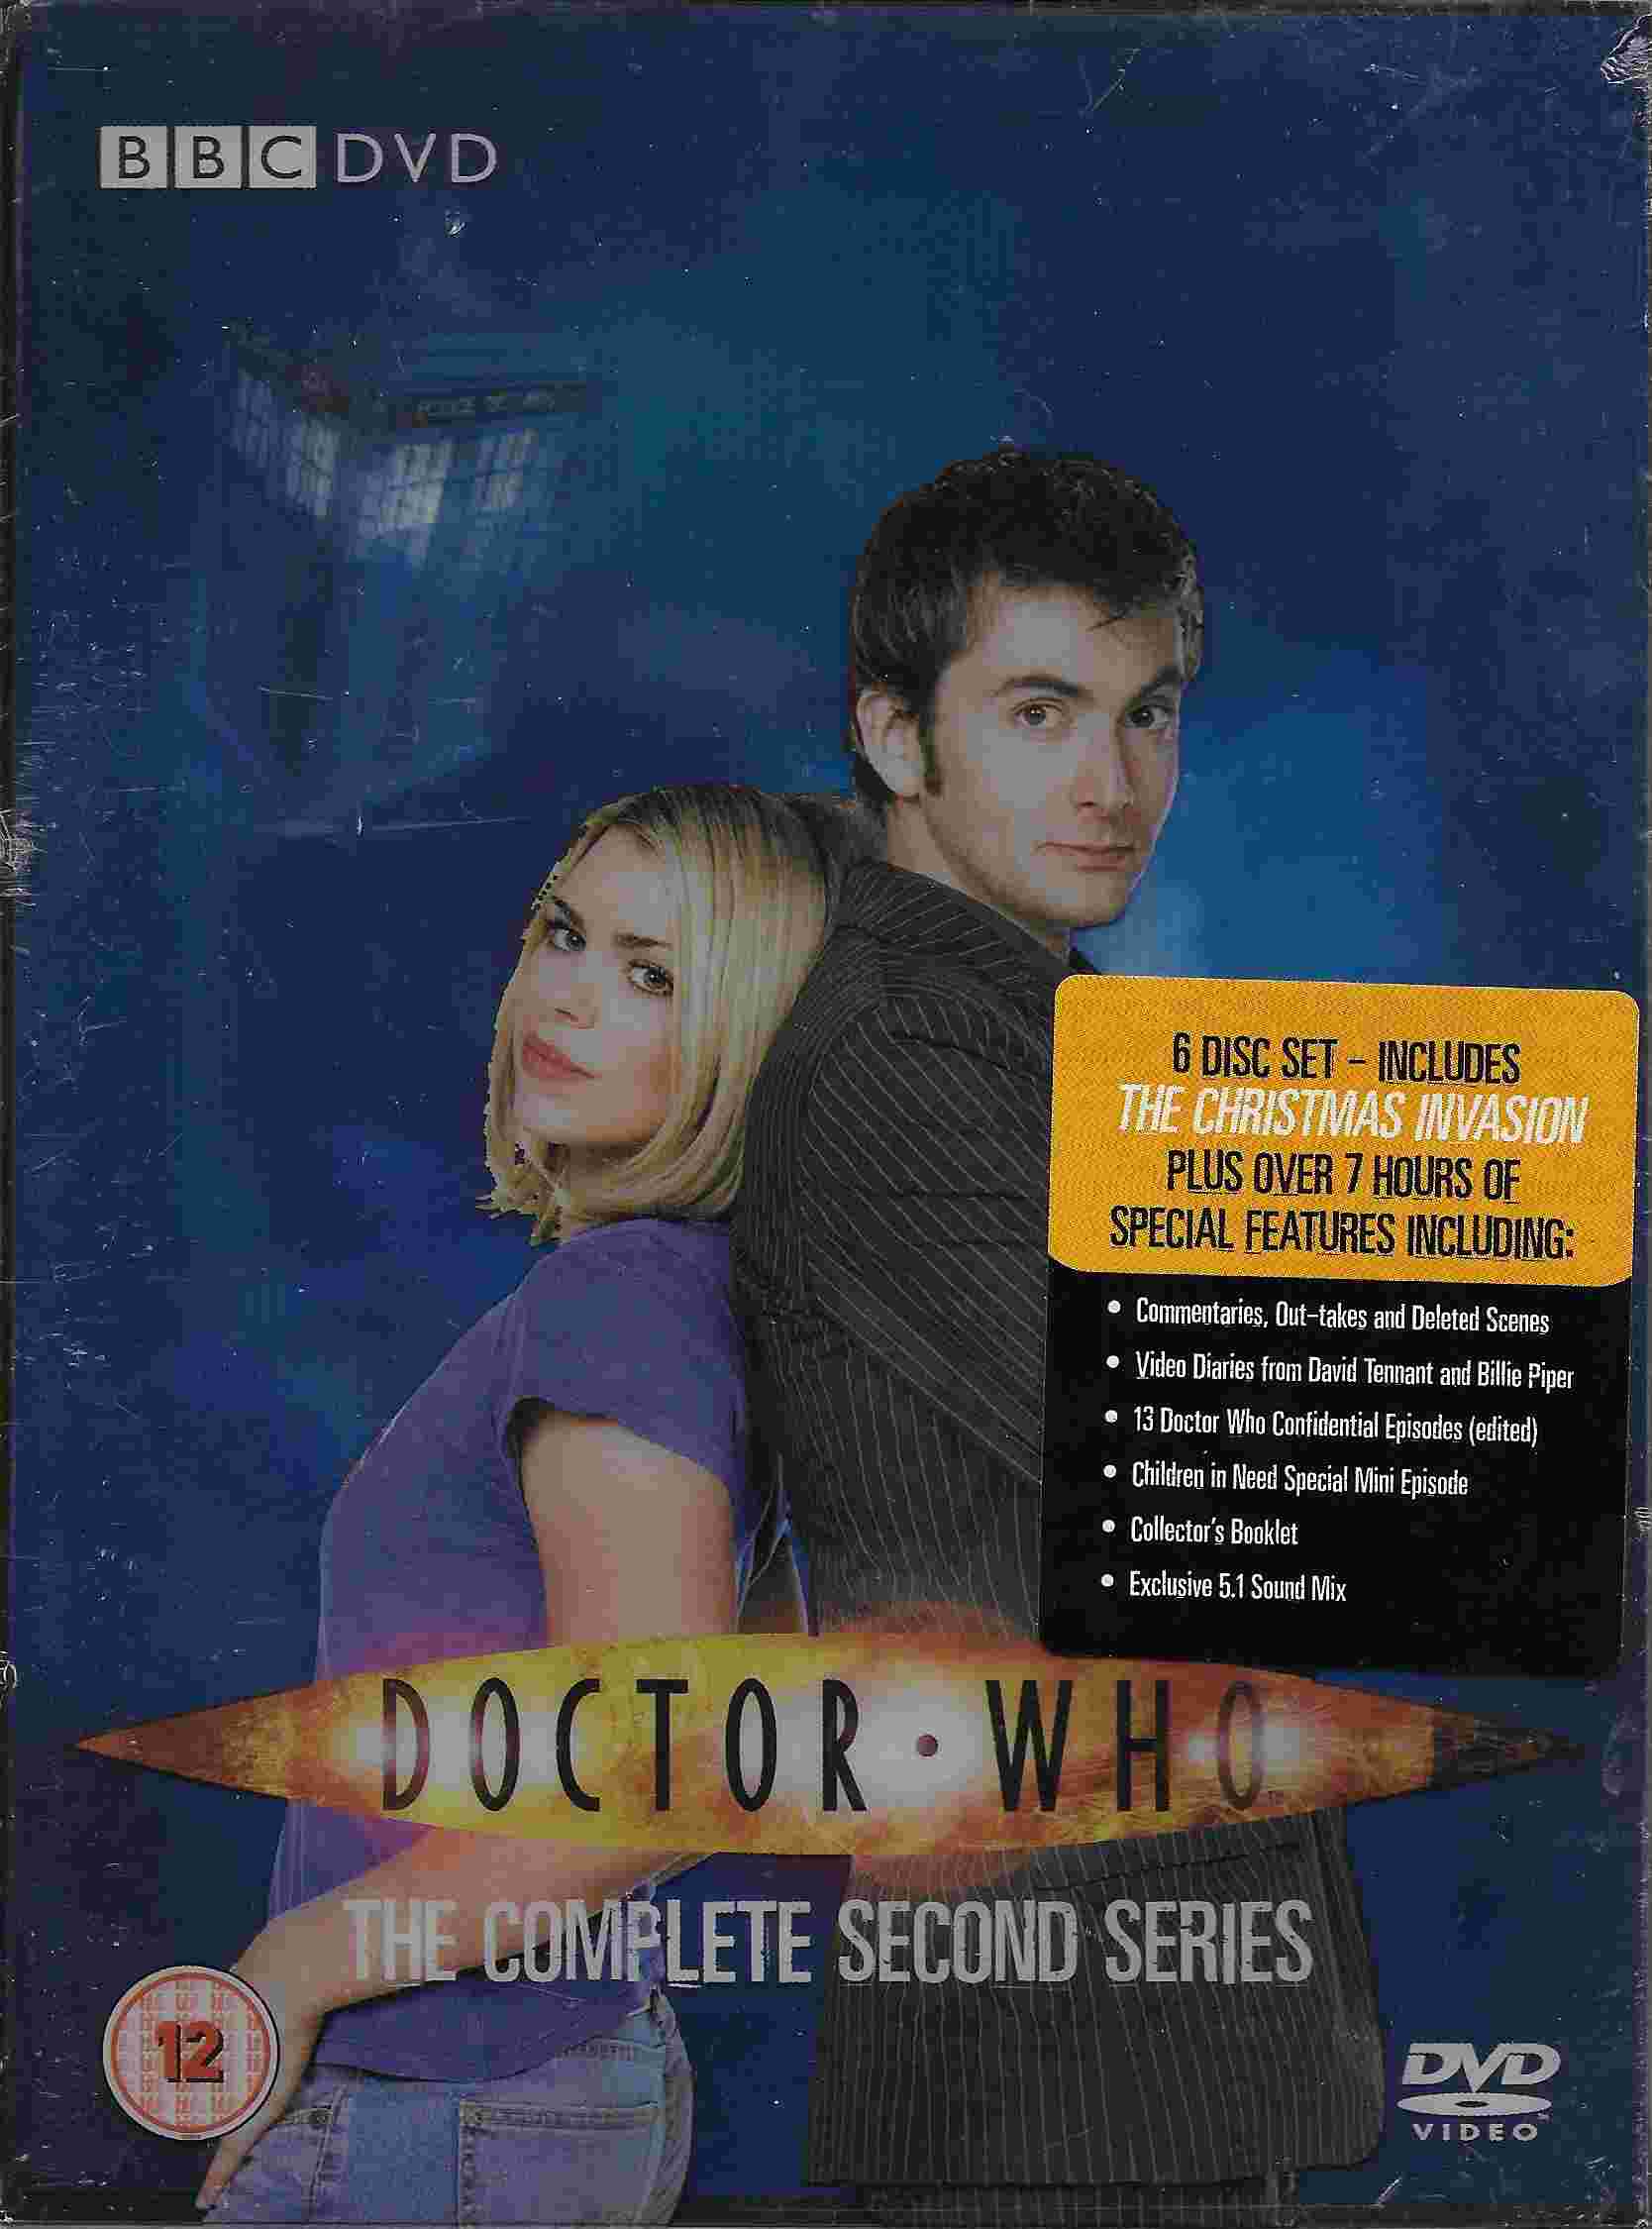 Picture of BBCDVD 2122 Doctor Who - Series 2 boxed set by artist Various from the BBC dvds - Records and Tapes library